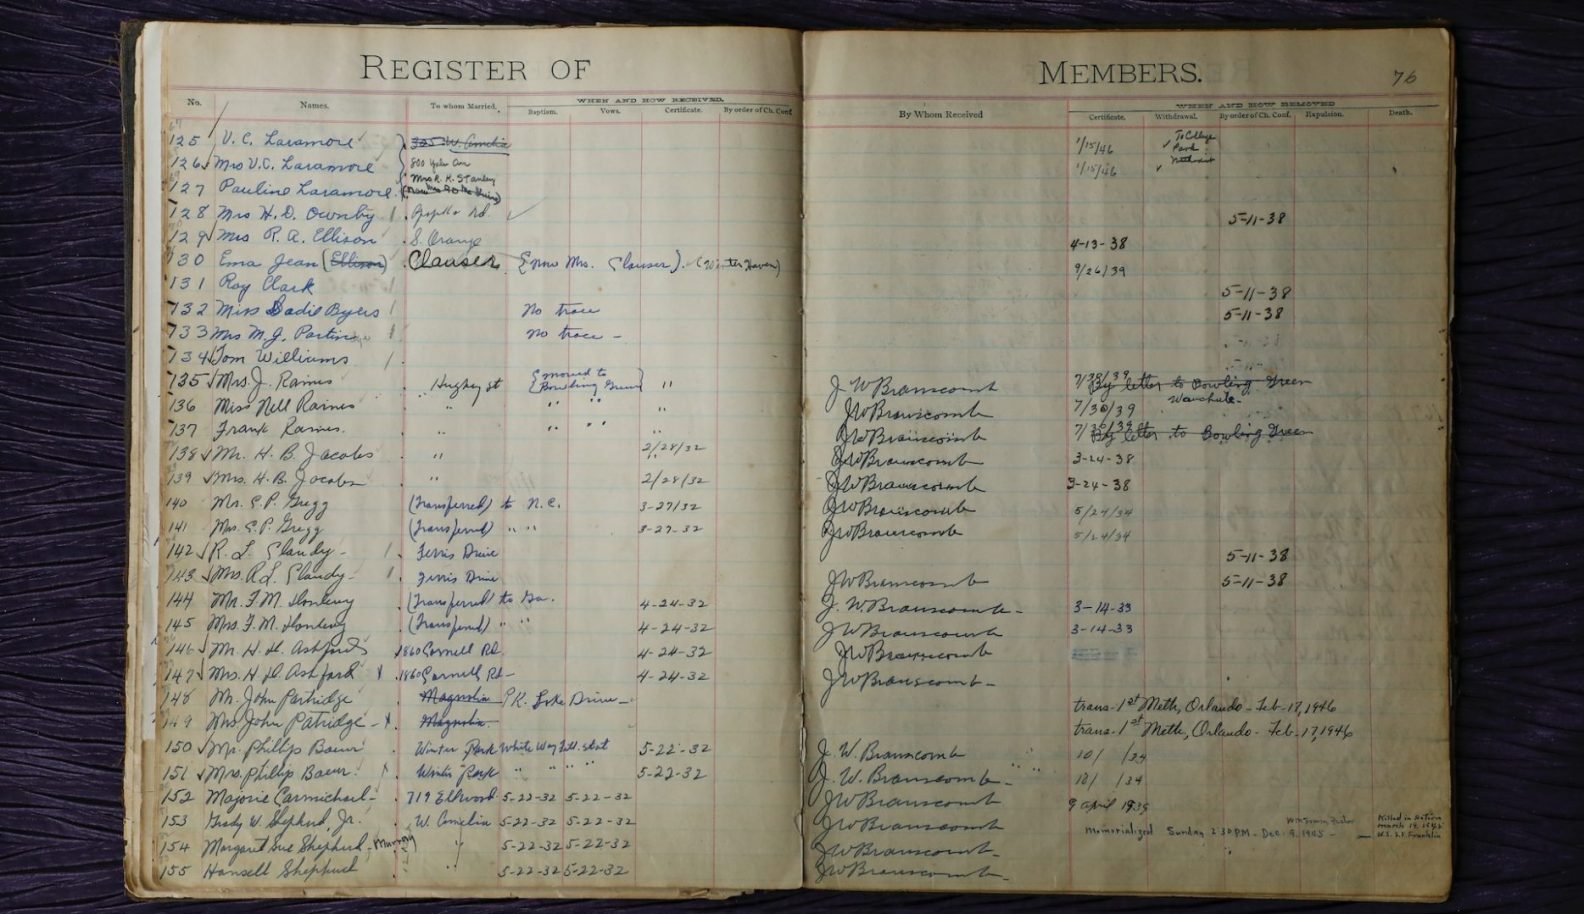 Logbook containing names